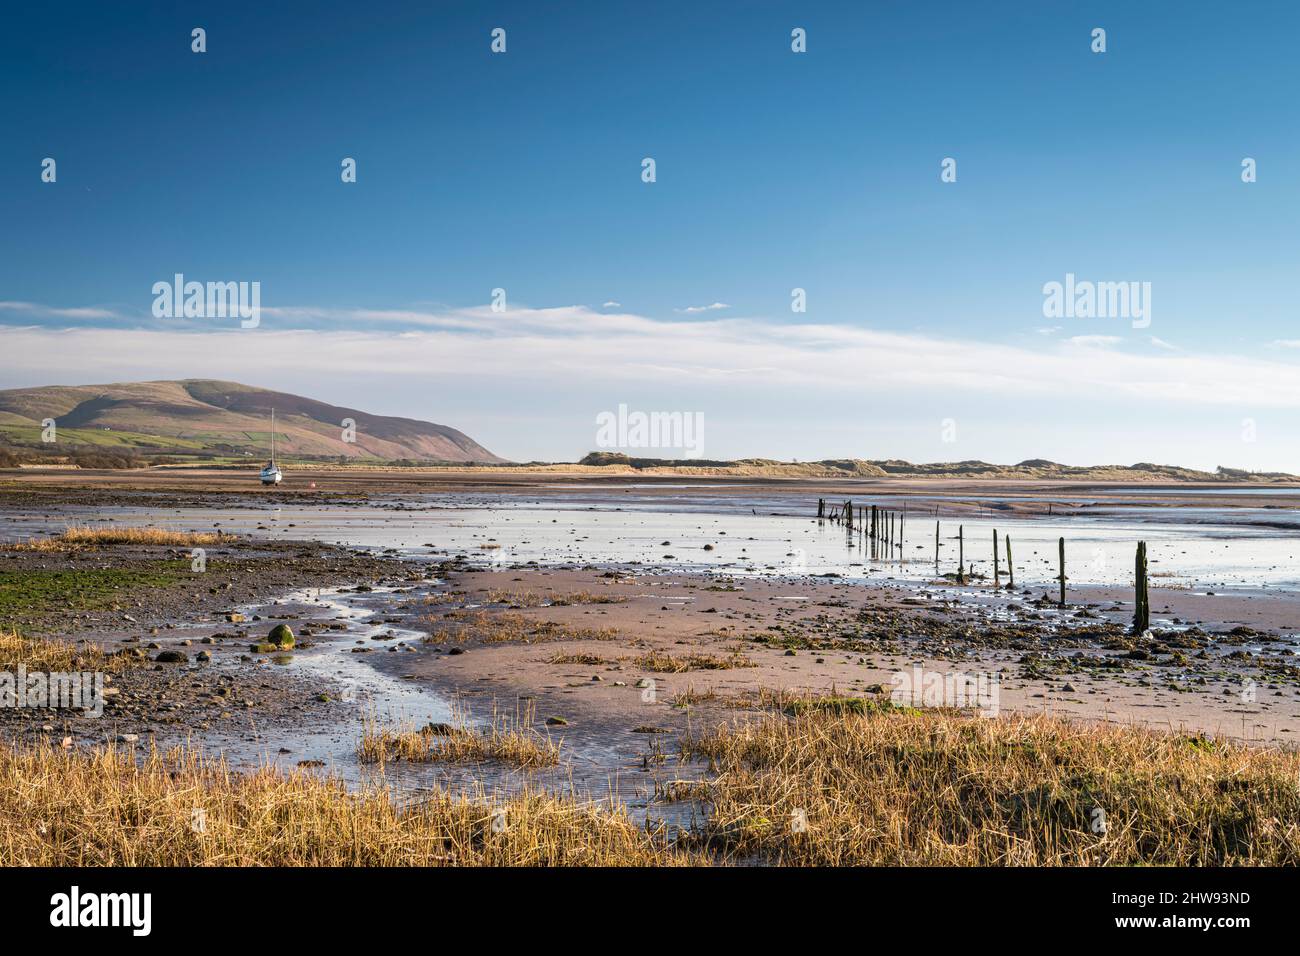 A peaceful, sunny, winter full frame HDR landscape image of Saltcoats bay at low tide near Ravenglass, Cumbria, England. 01 March 2022 Stock Photo